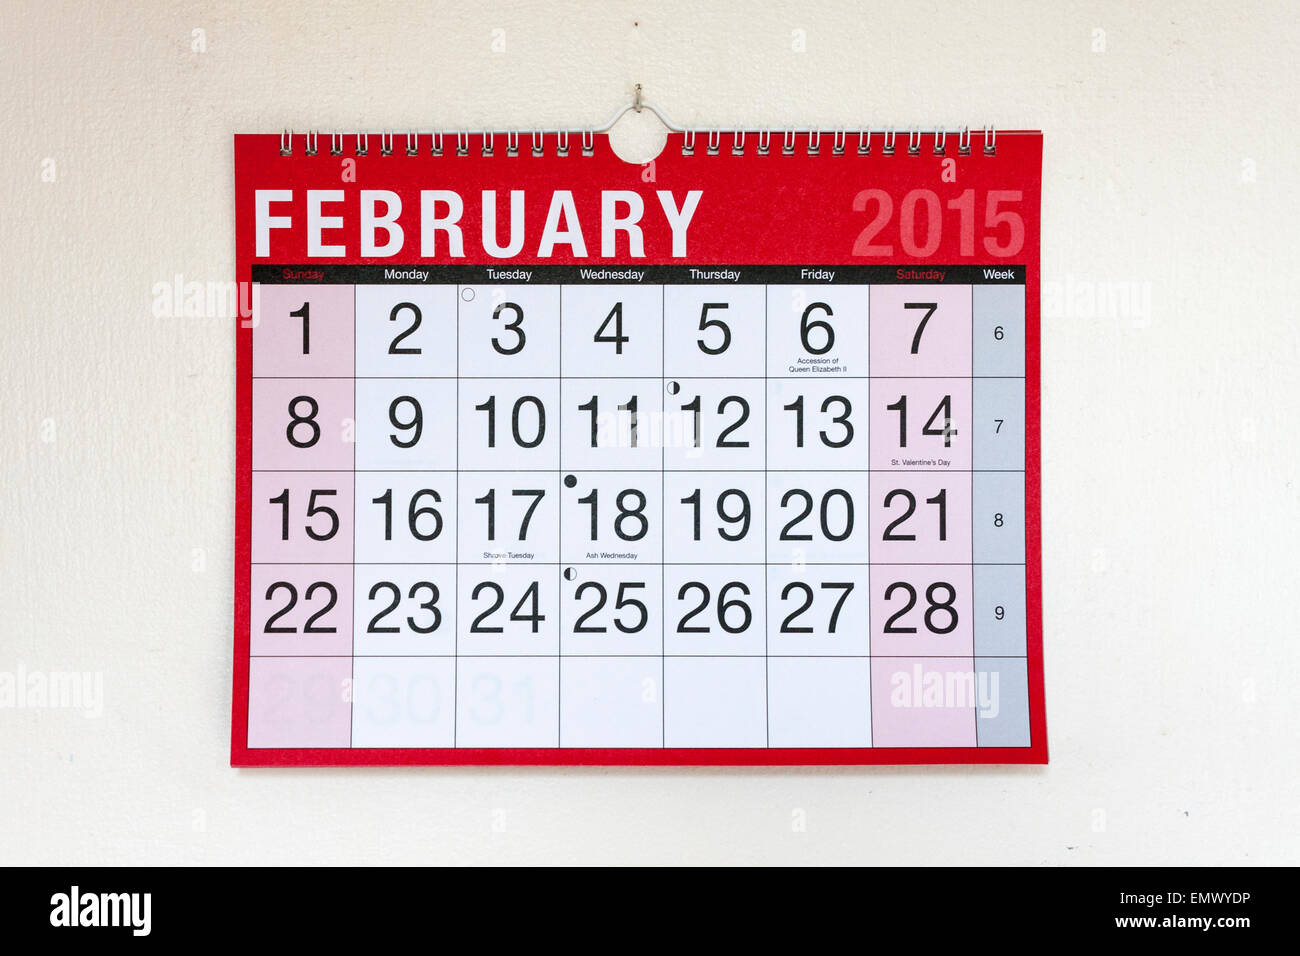 Wall calendar for month of February 2015 Stock Photo